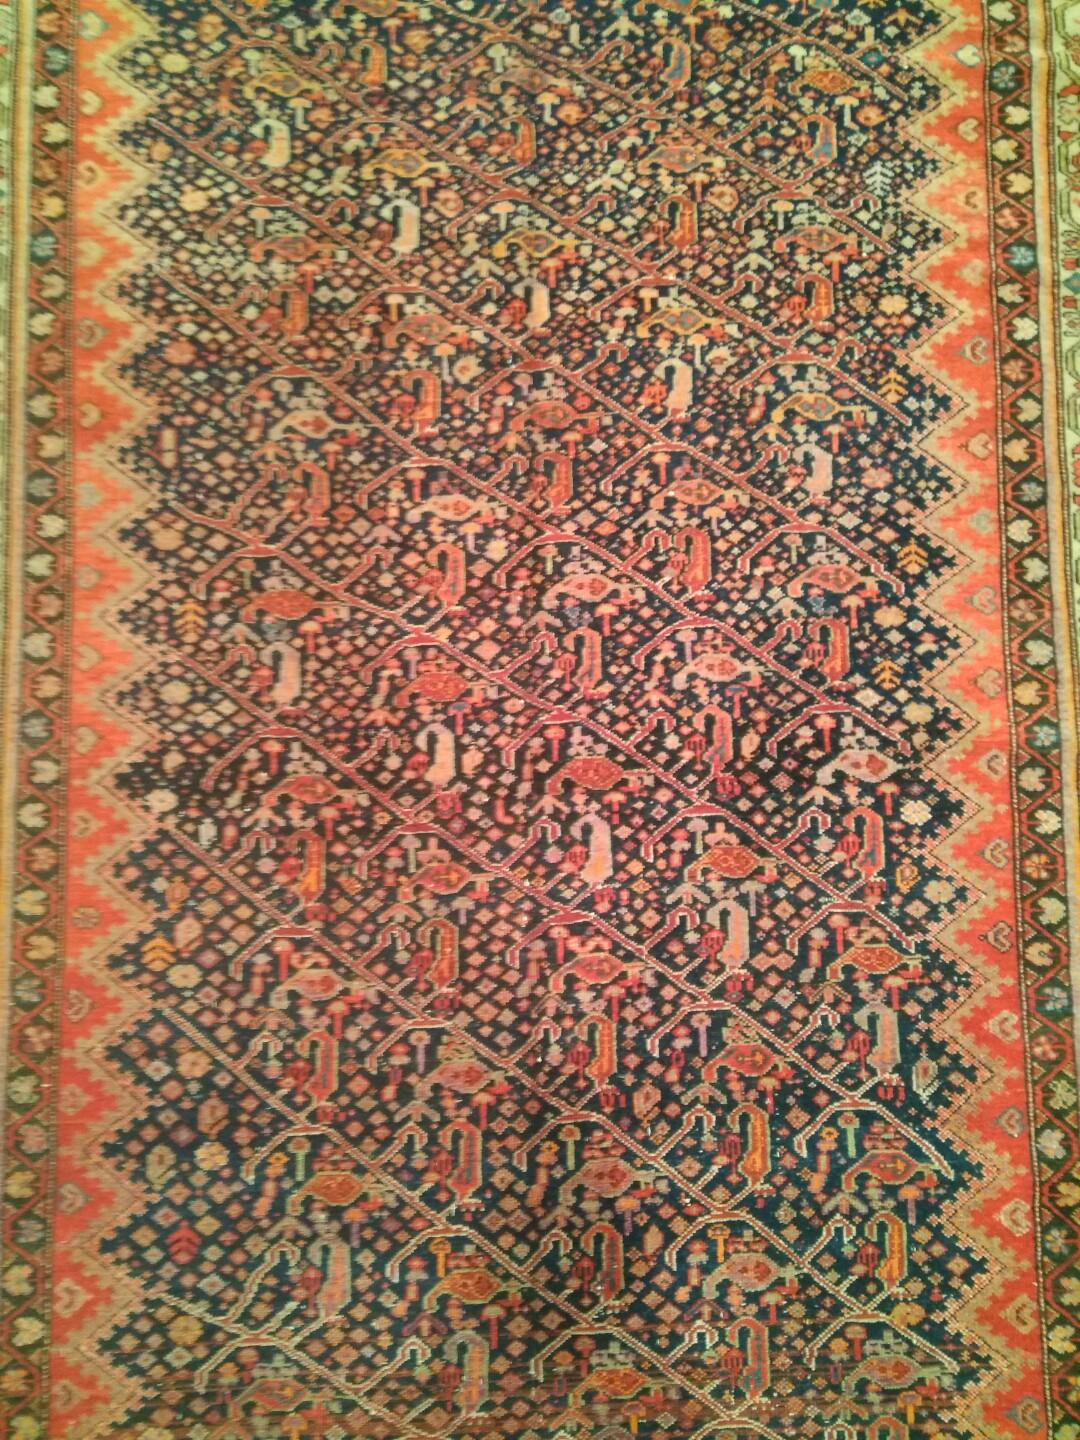 Known in the old rug literature as ‘Gentleman’s carpets’, Qarabagh long rugs such as this one represent a classic late nineteenth century type which became quite popular in the West, especially because of its traditional kelleh format, in which the